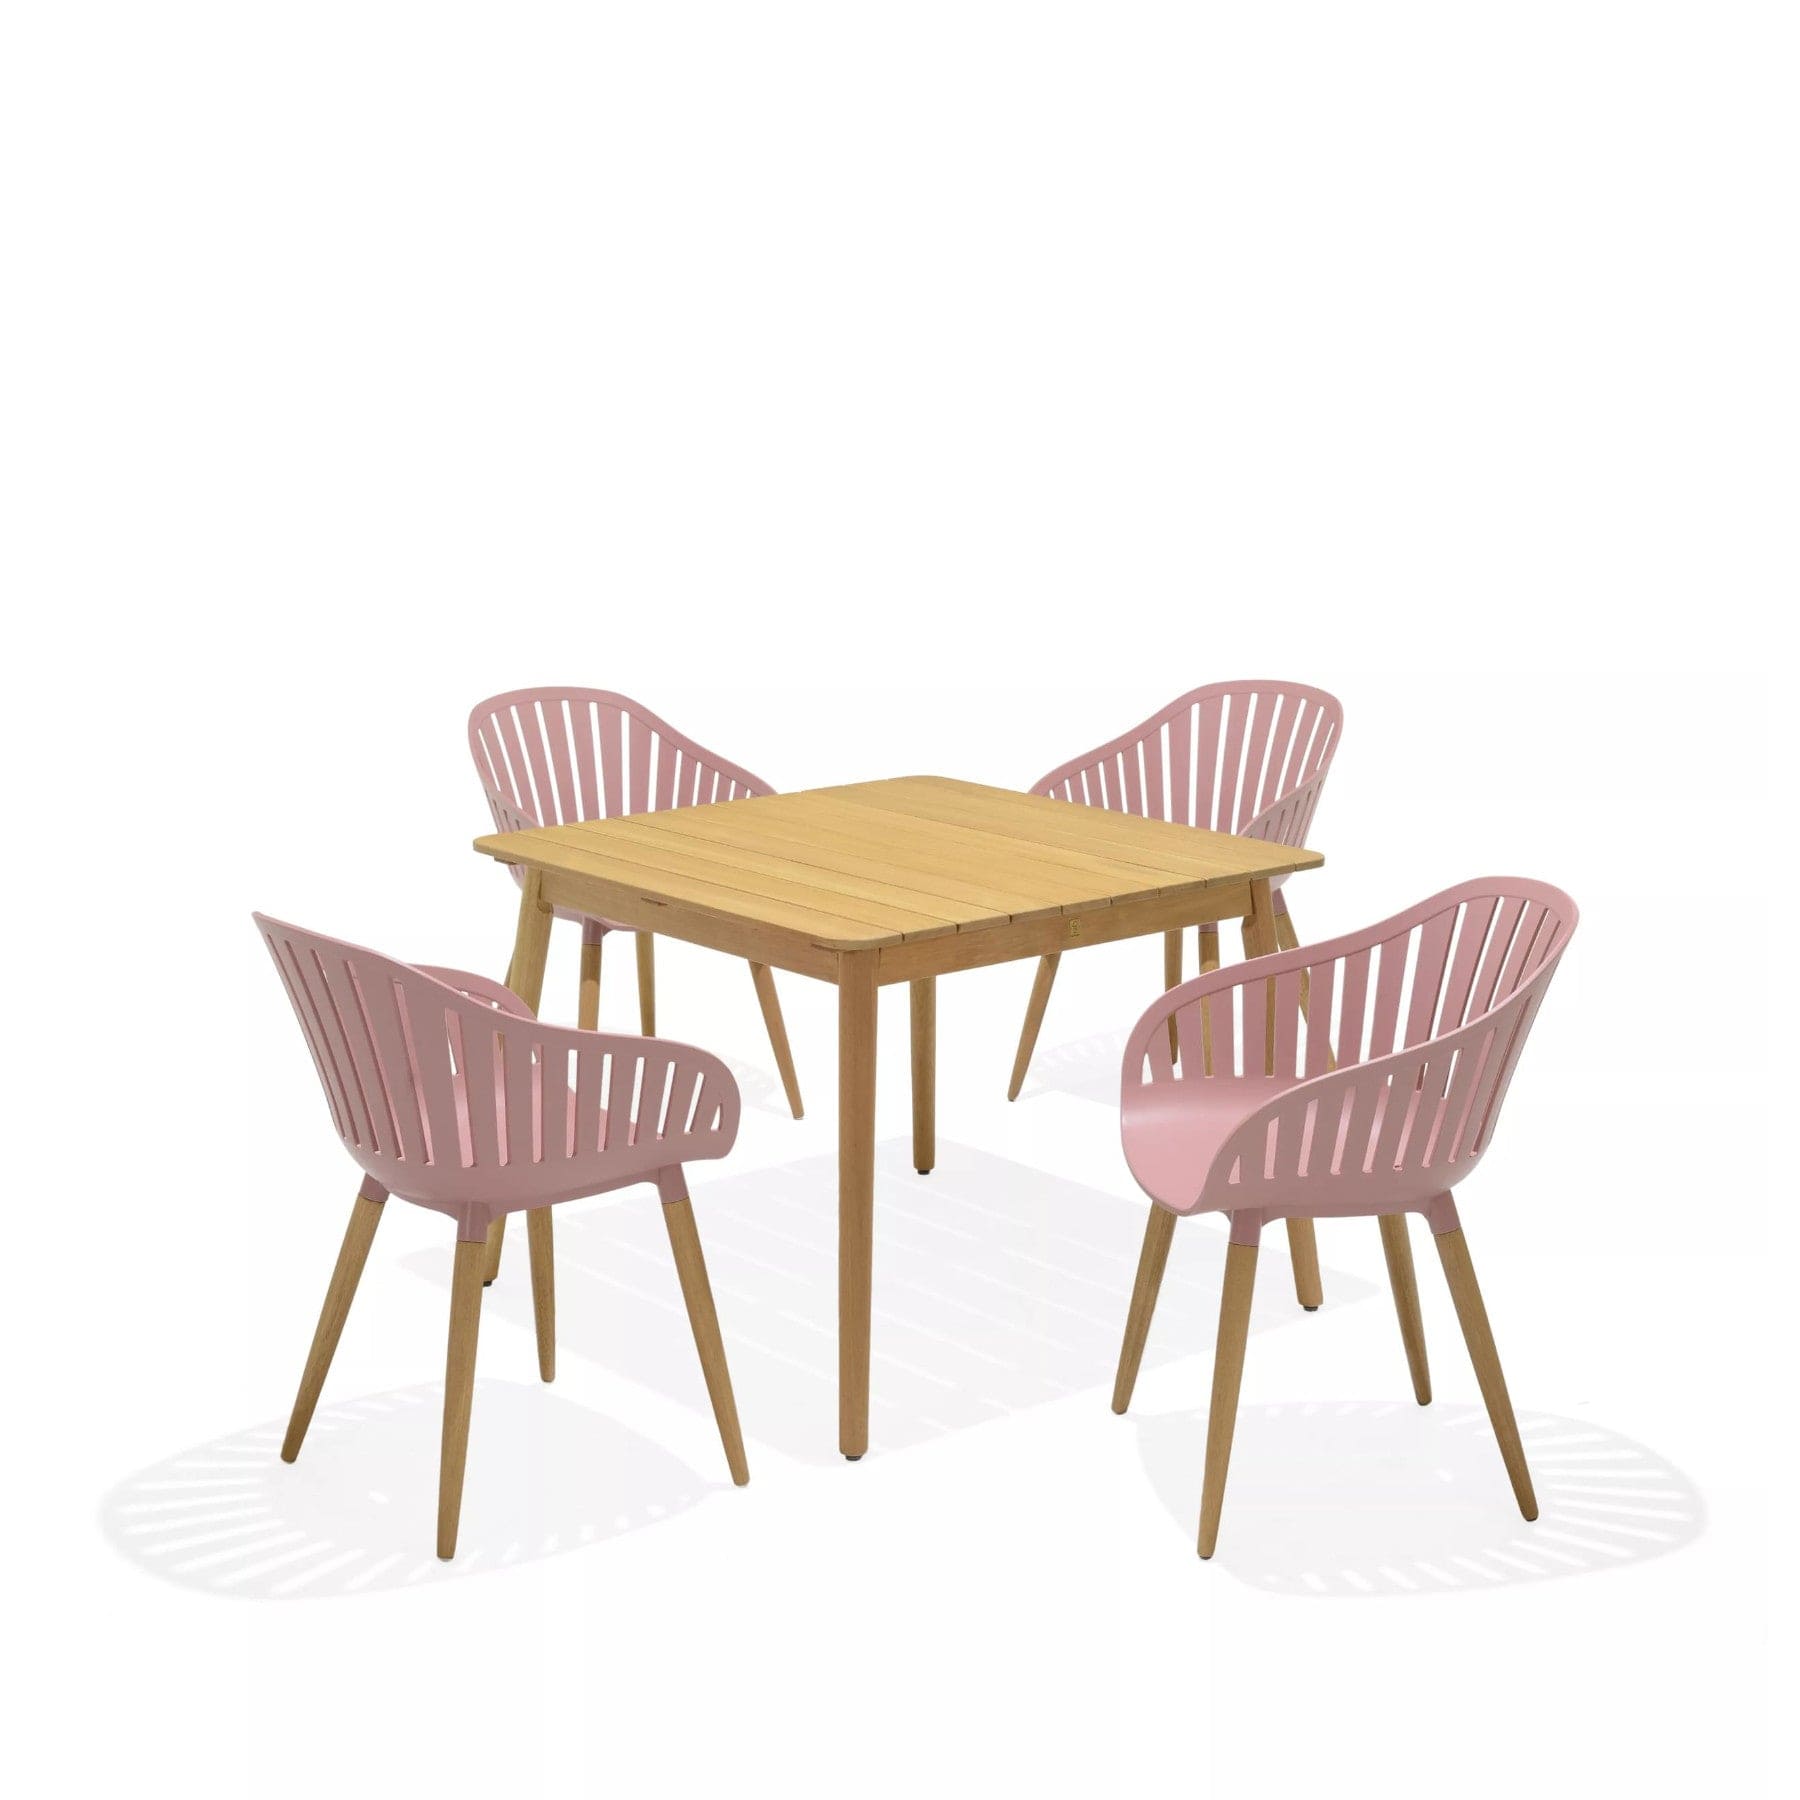 Modern wooden dining table with pink chairs in a minimalist setting